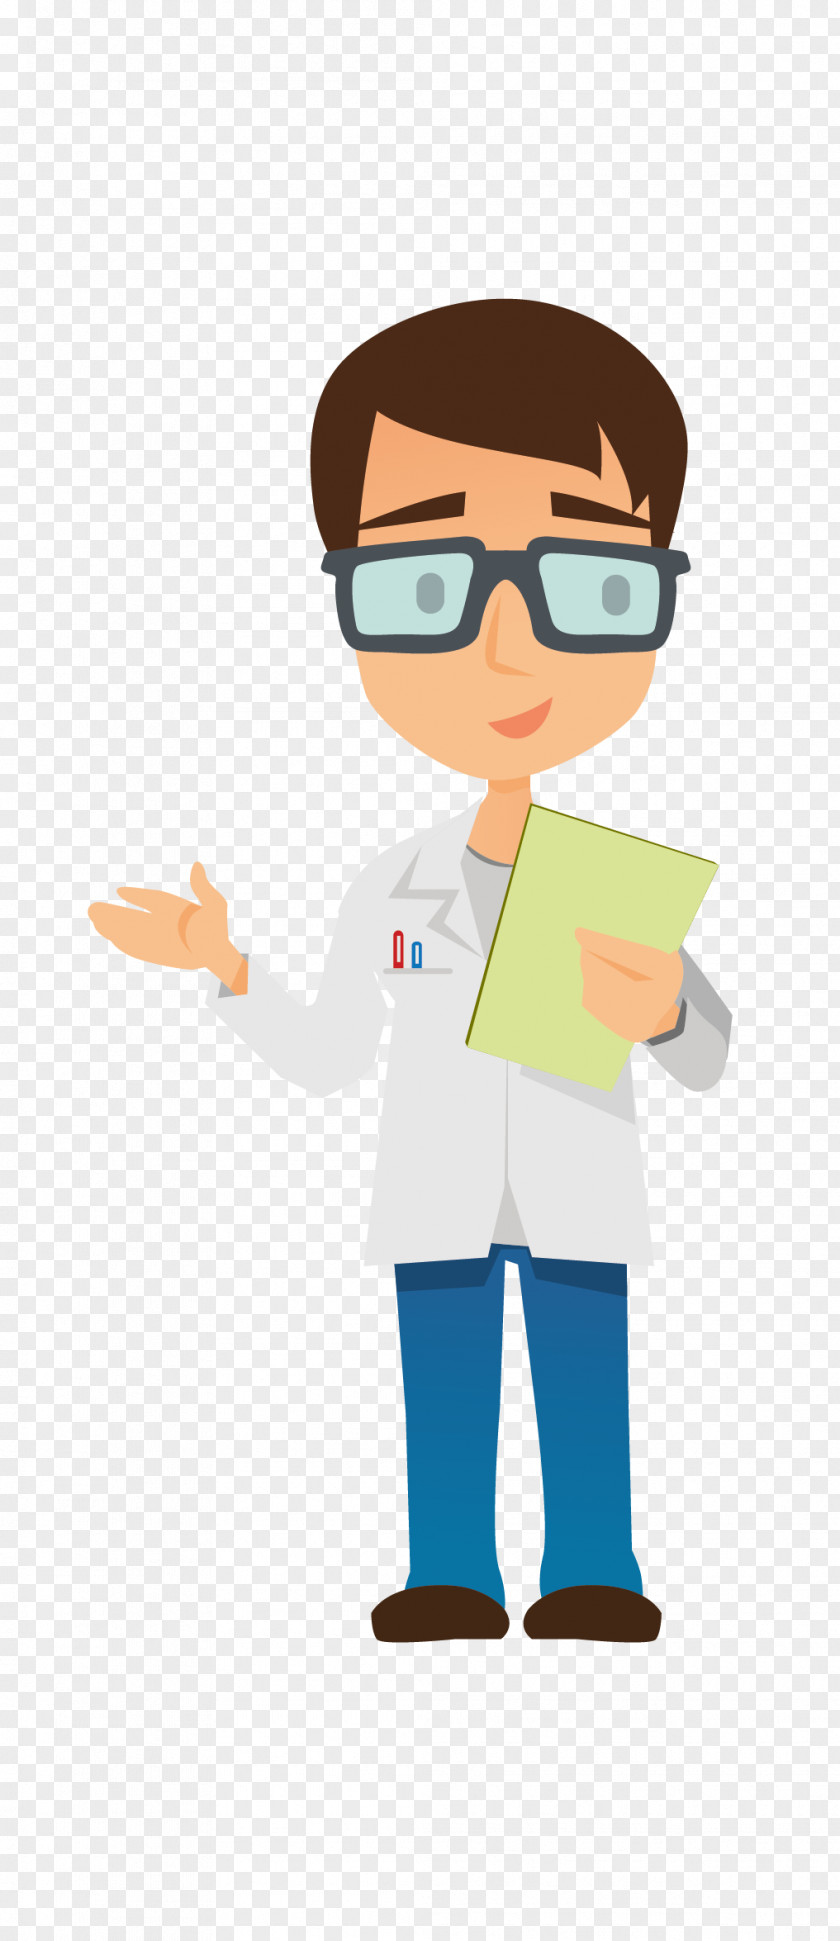 Health Care Provider Gesture Stethoscope Cartoon PNG